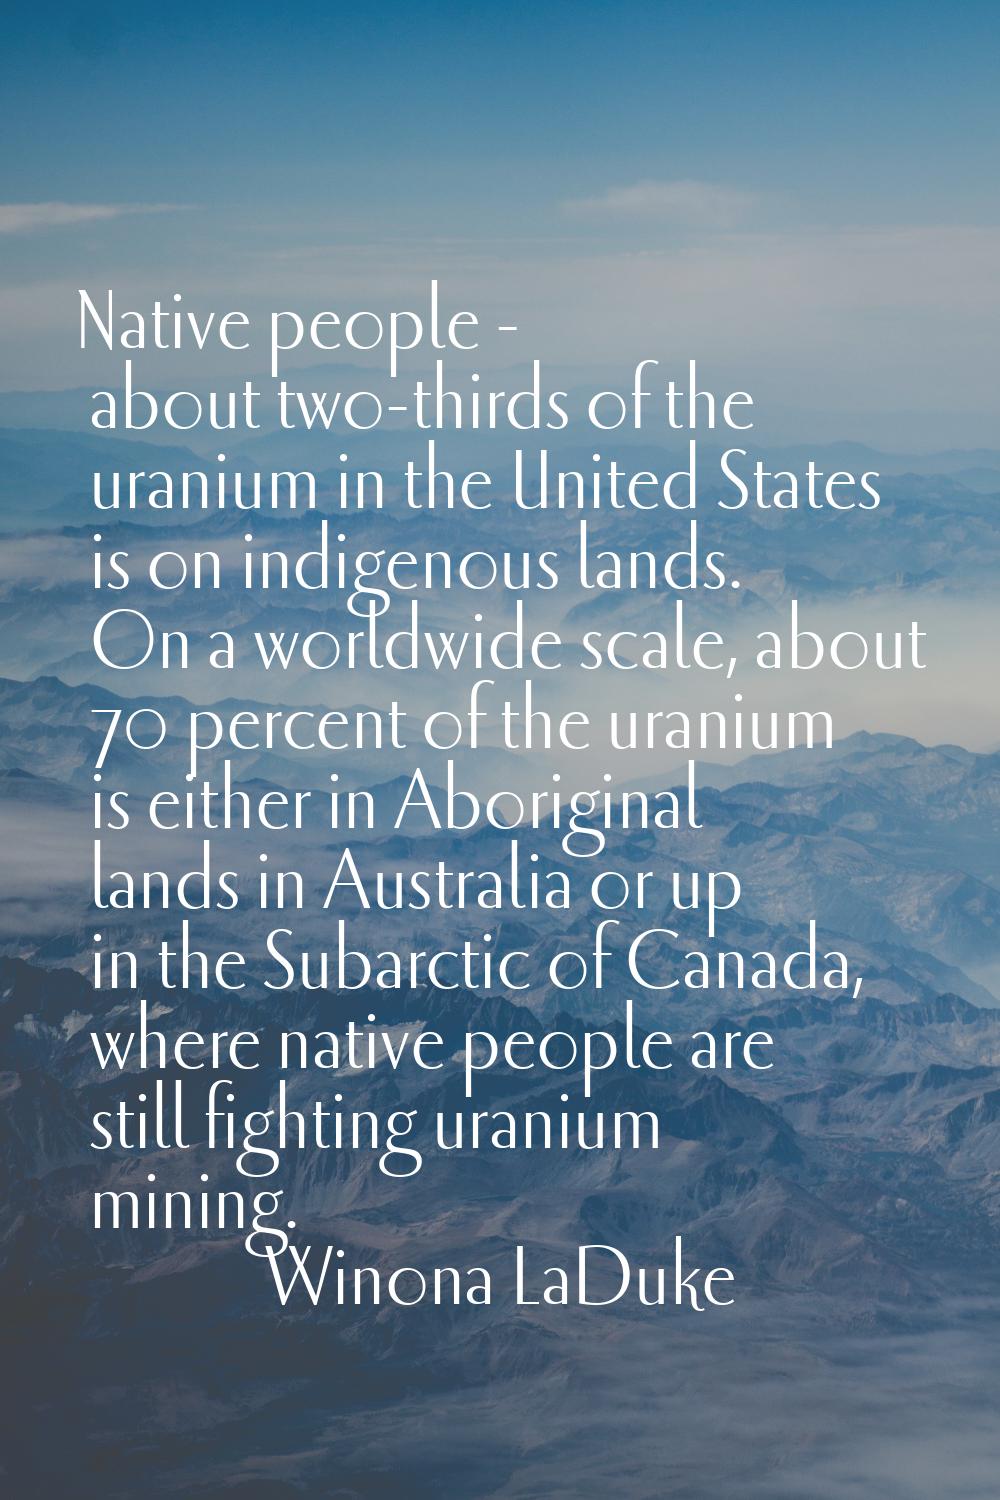 Native people - about two-thirds of the uranium in the United States is on indigenous lands. On a w